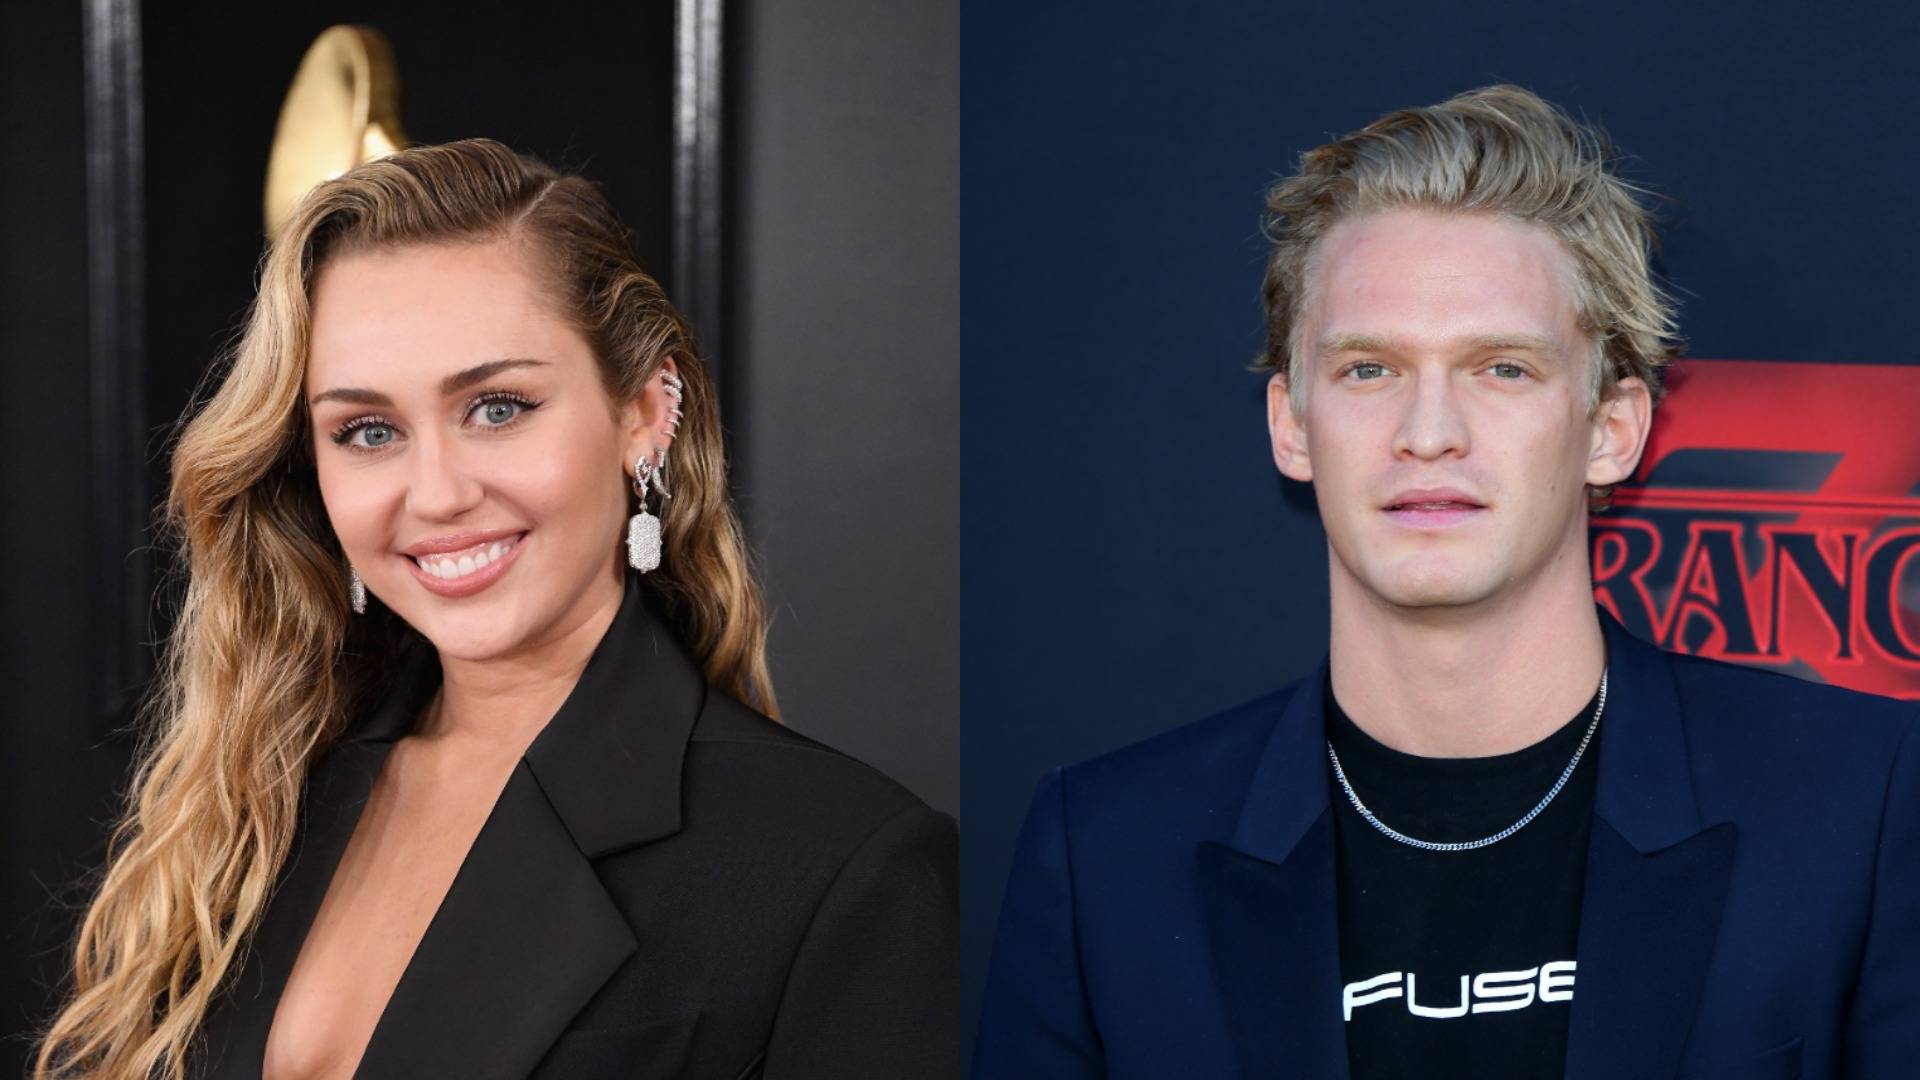 Composite photo of Miley cyrus in black jacket and Cody Simpson in navy jacket and fuse shirt 